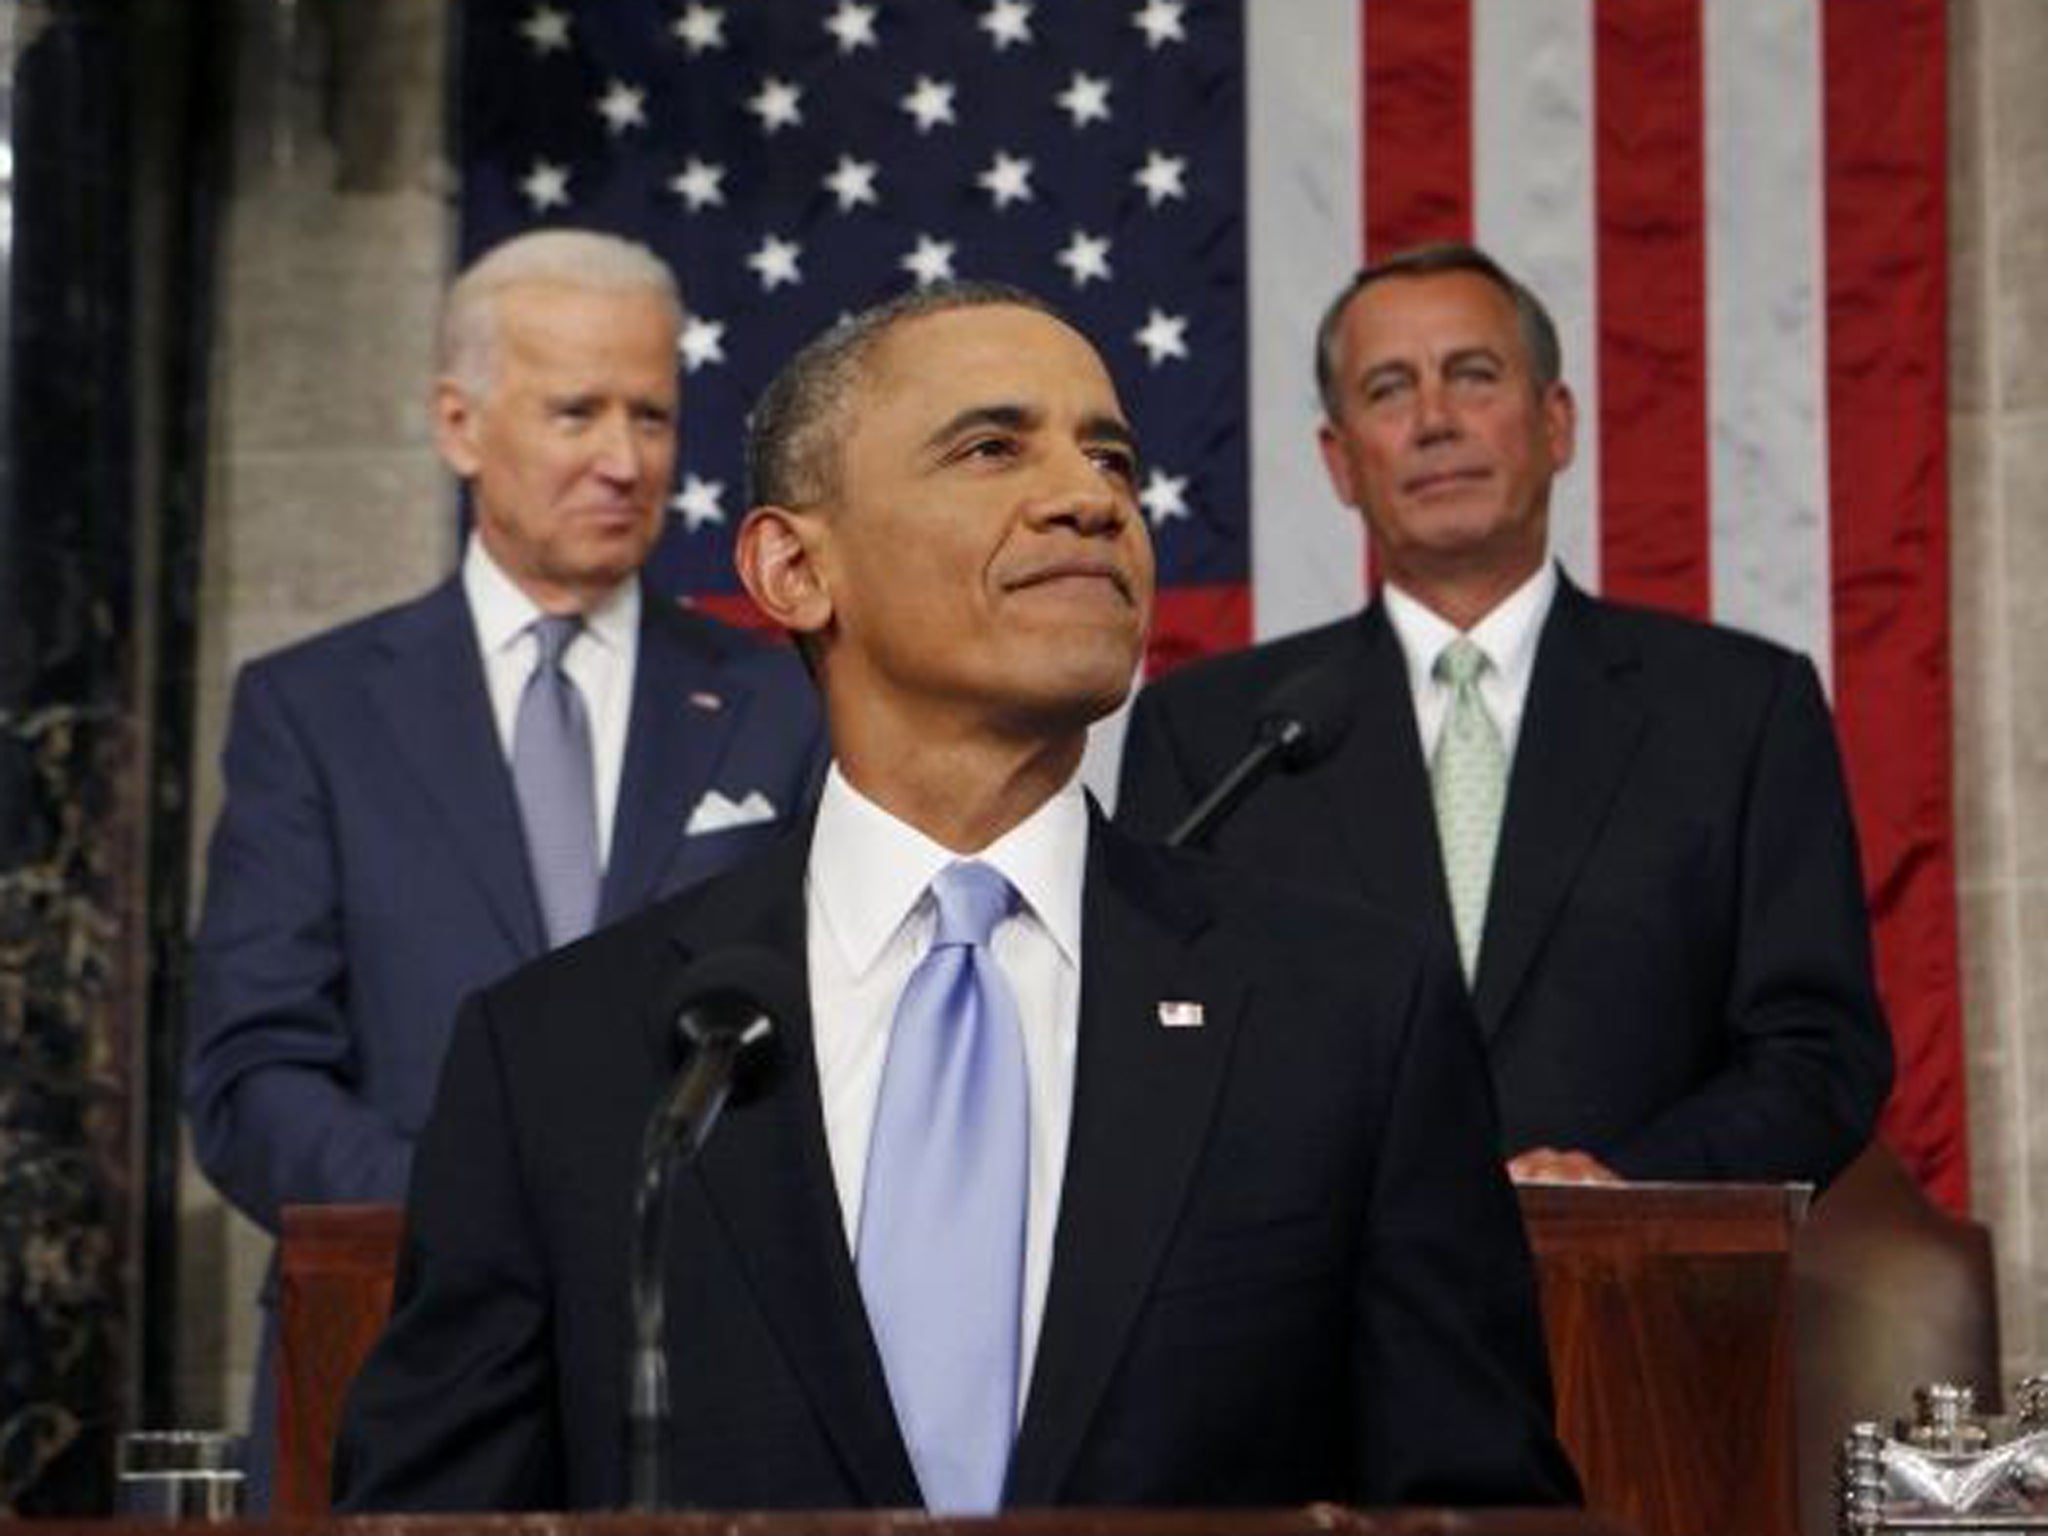 President Obama urged members of Congress to make 2014 a 'year of action' in his State of the Union address